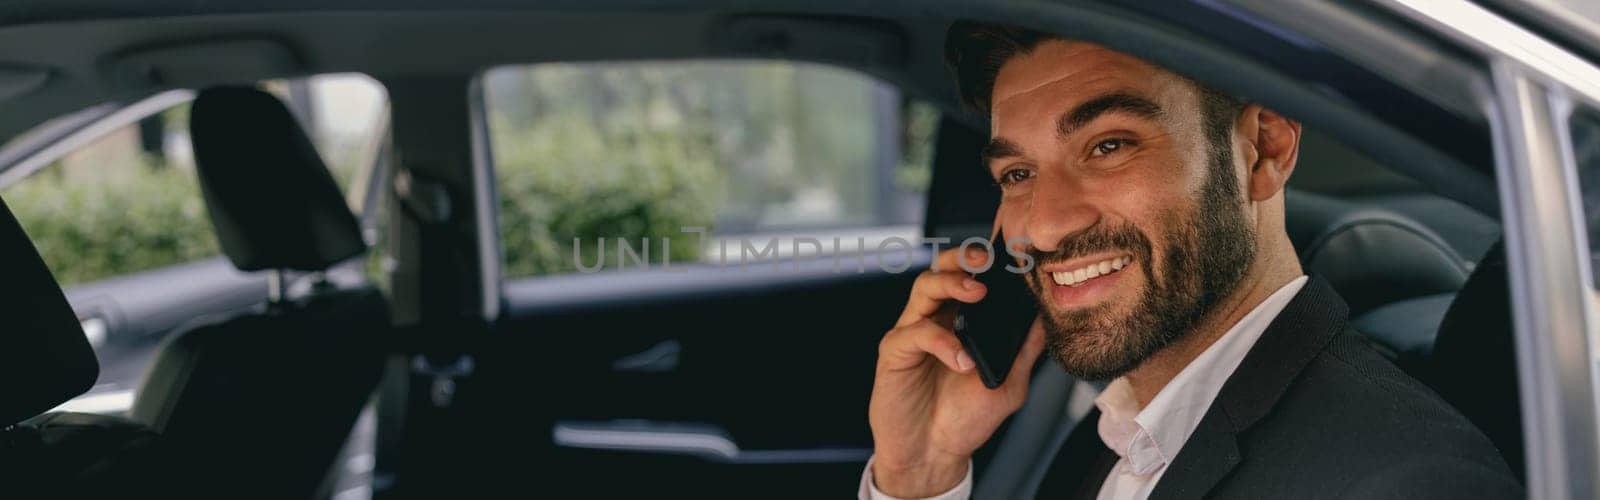 Handsome smiling businessman in suit using personal computer and making phone call in taxi by Yaroslav_astakhov